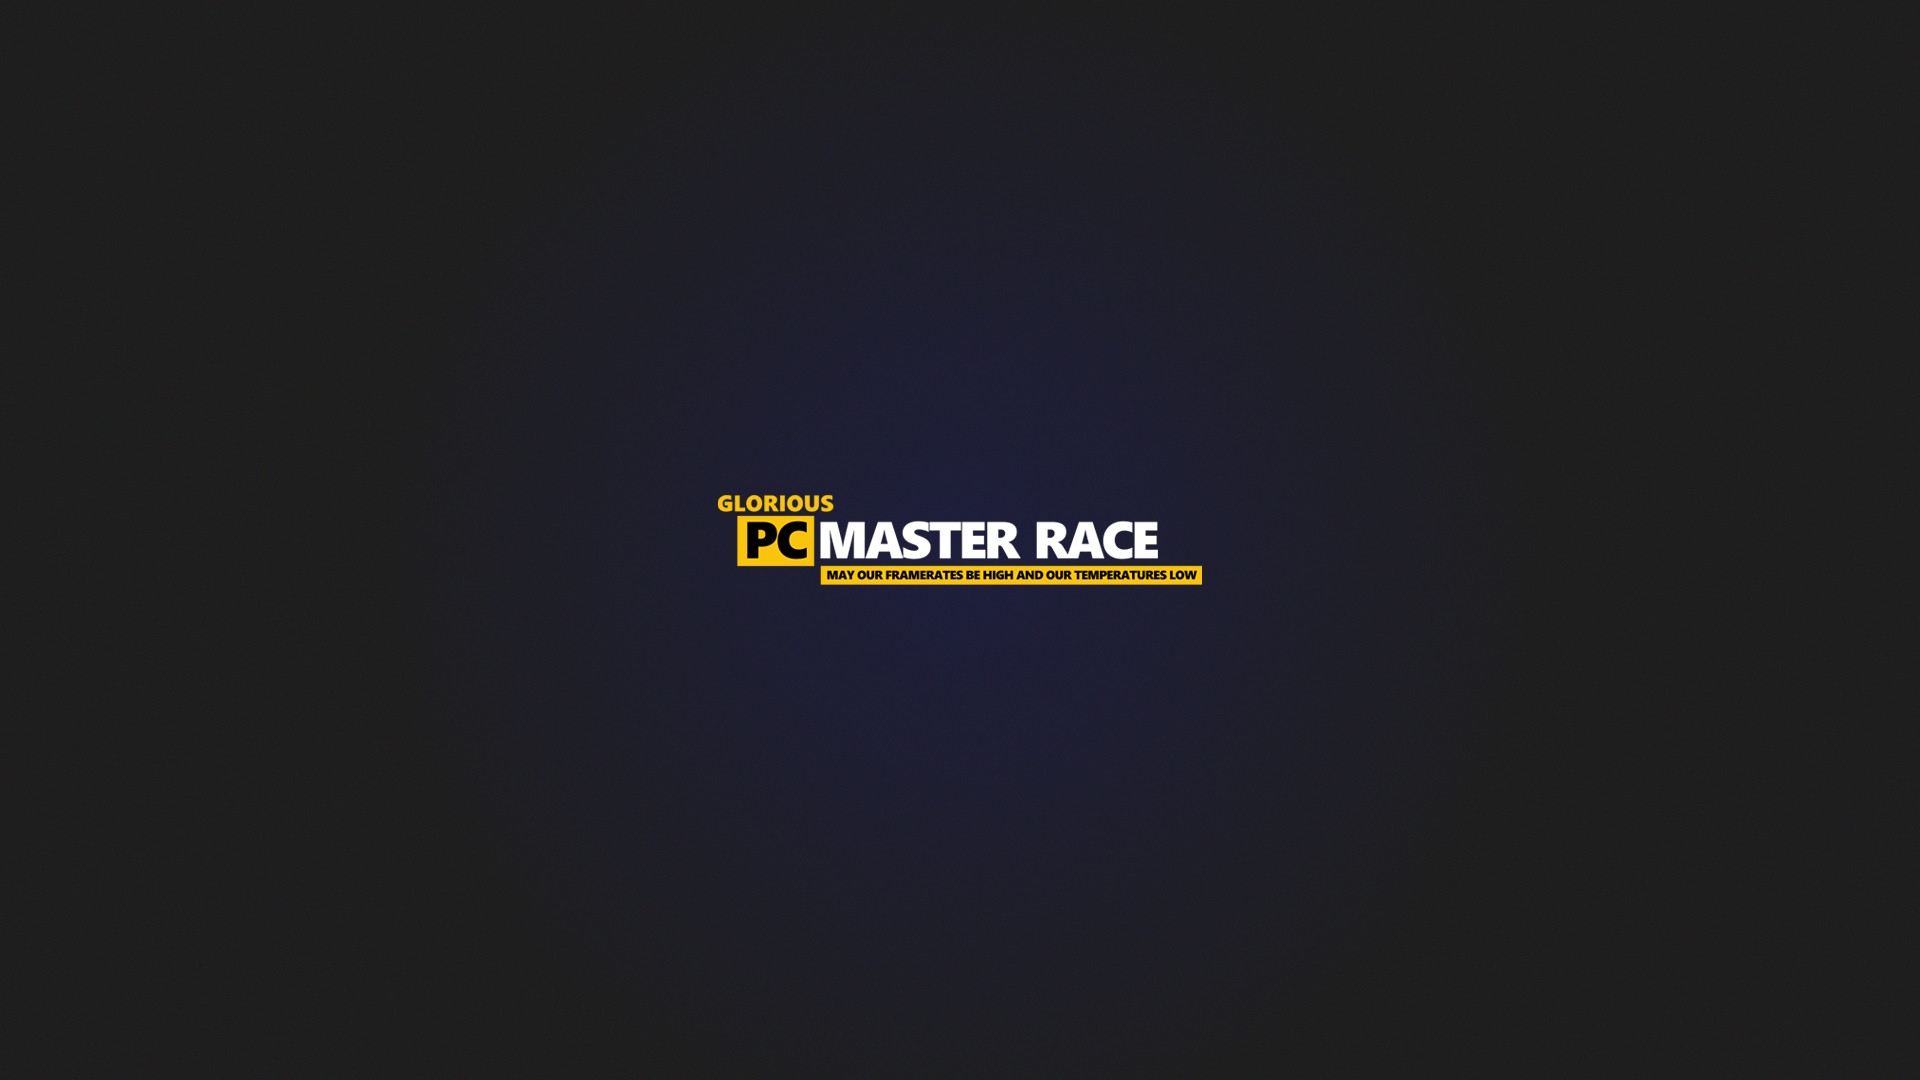 Pc Master Race Full HD Bakgrund And